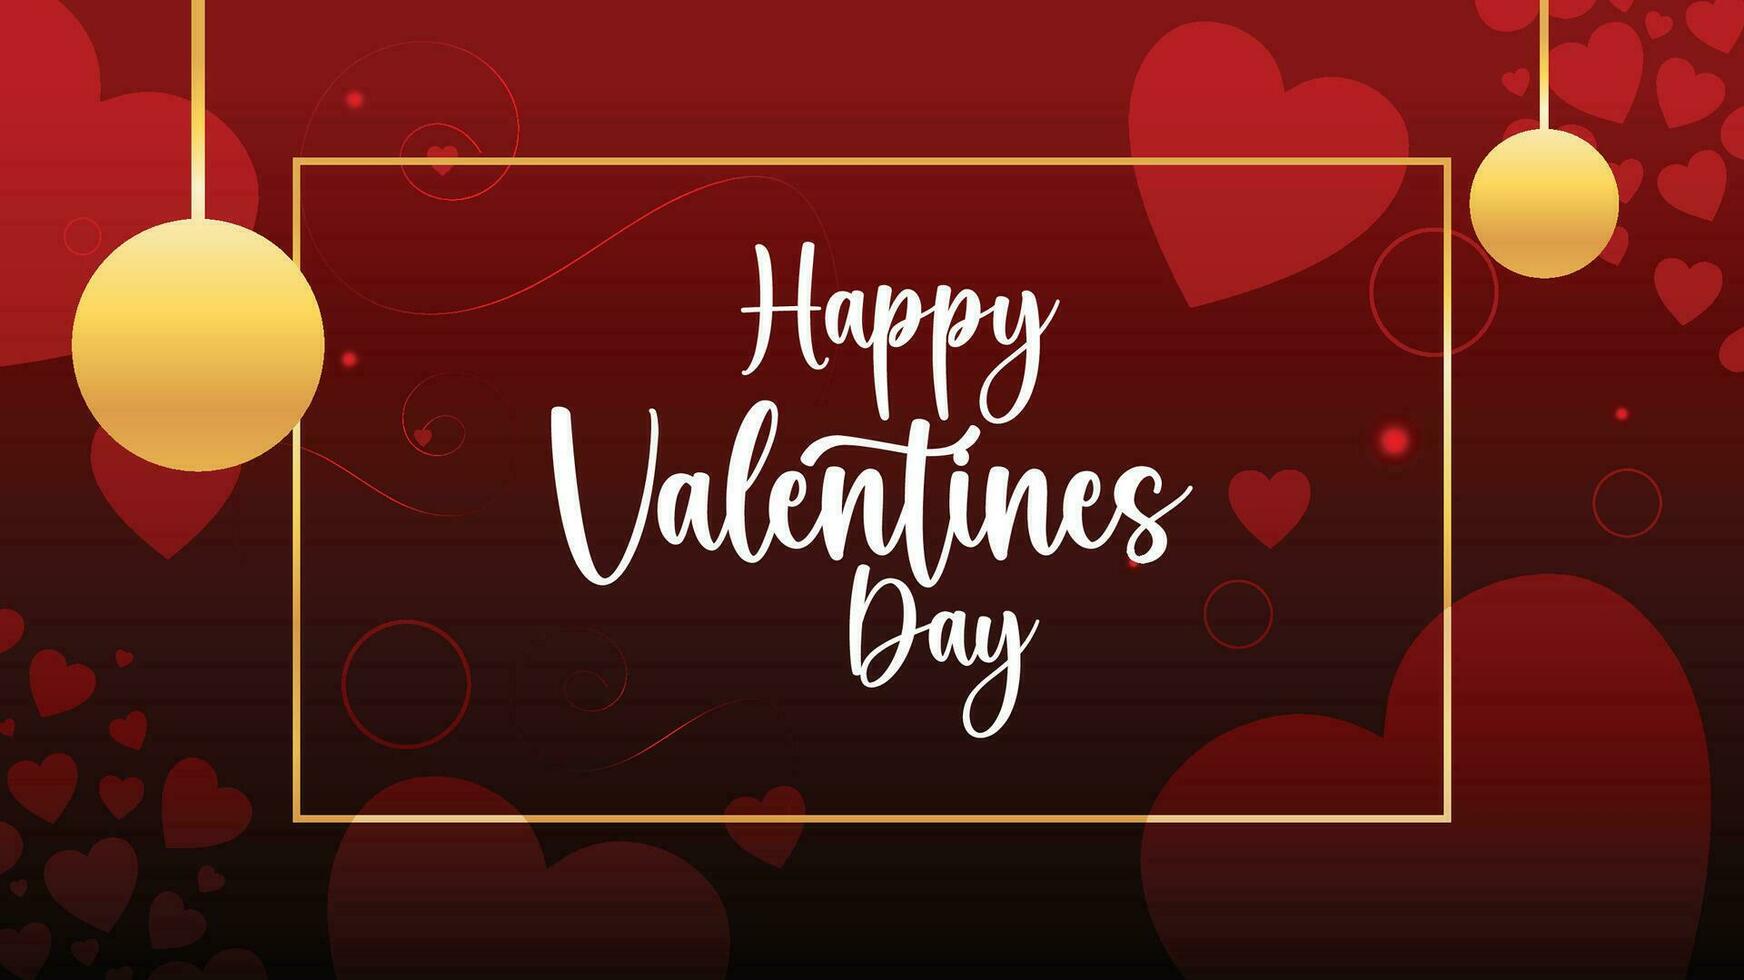 Happy Valentines Day Background Design Template vector